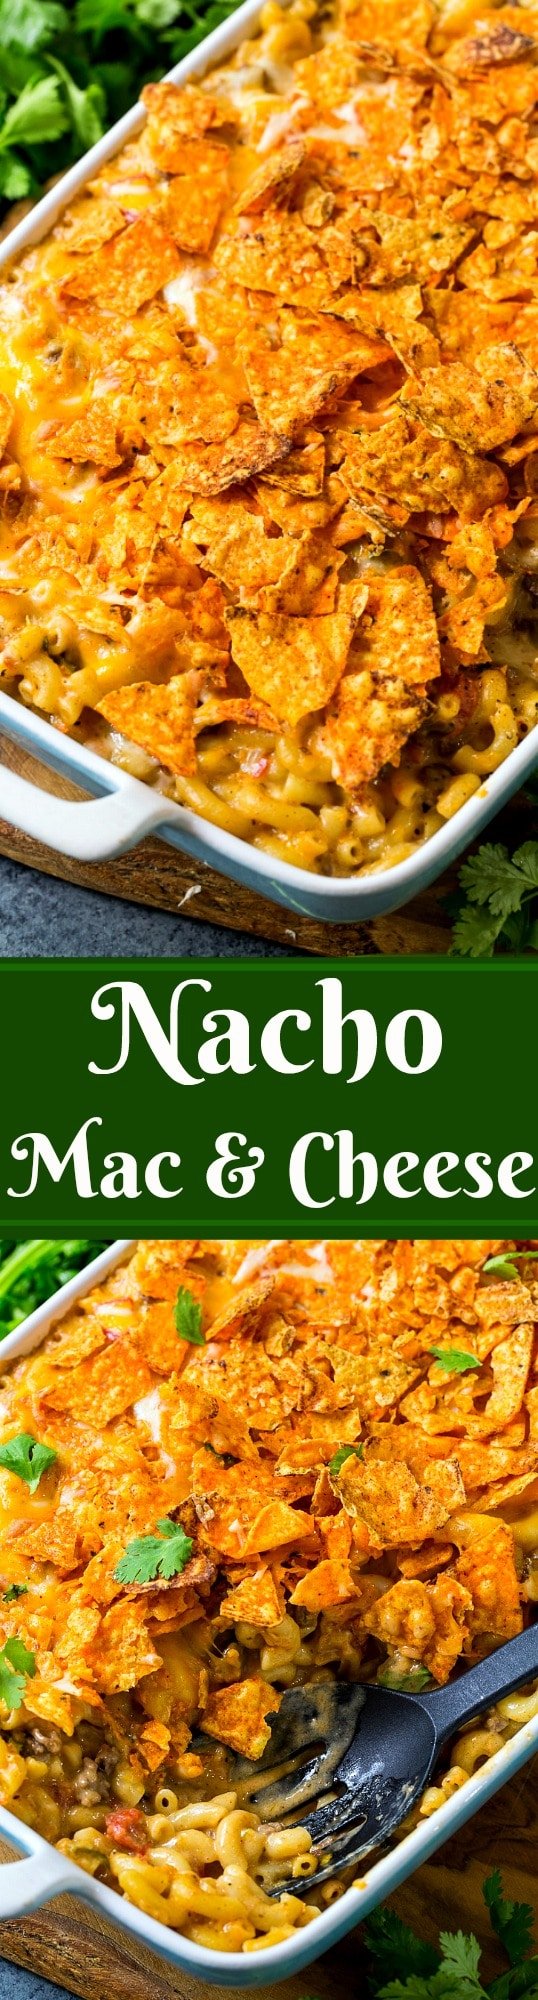 Nacho Mac & Cheese with ground beef and crushed Doritos on top.